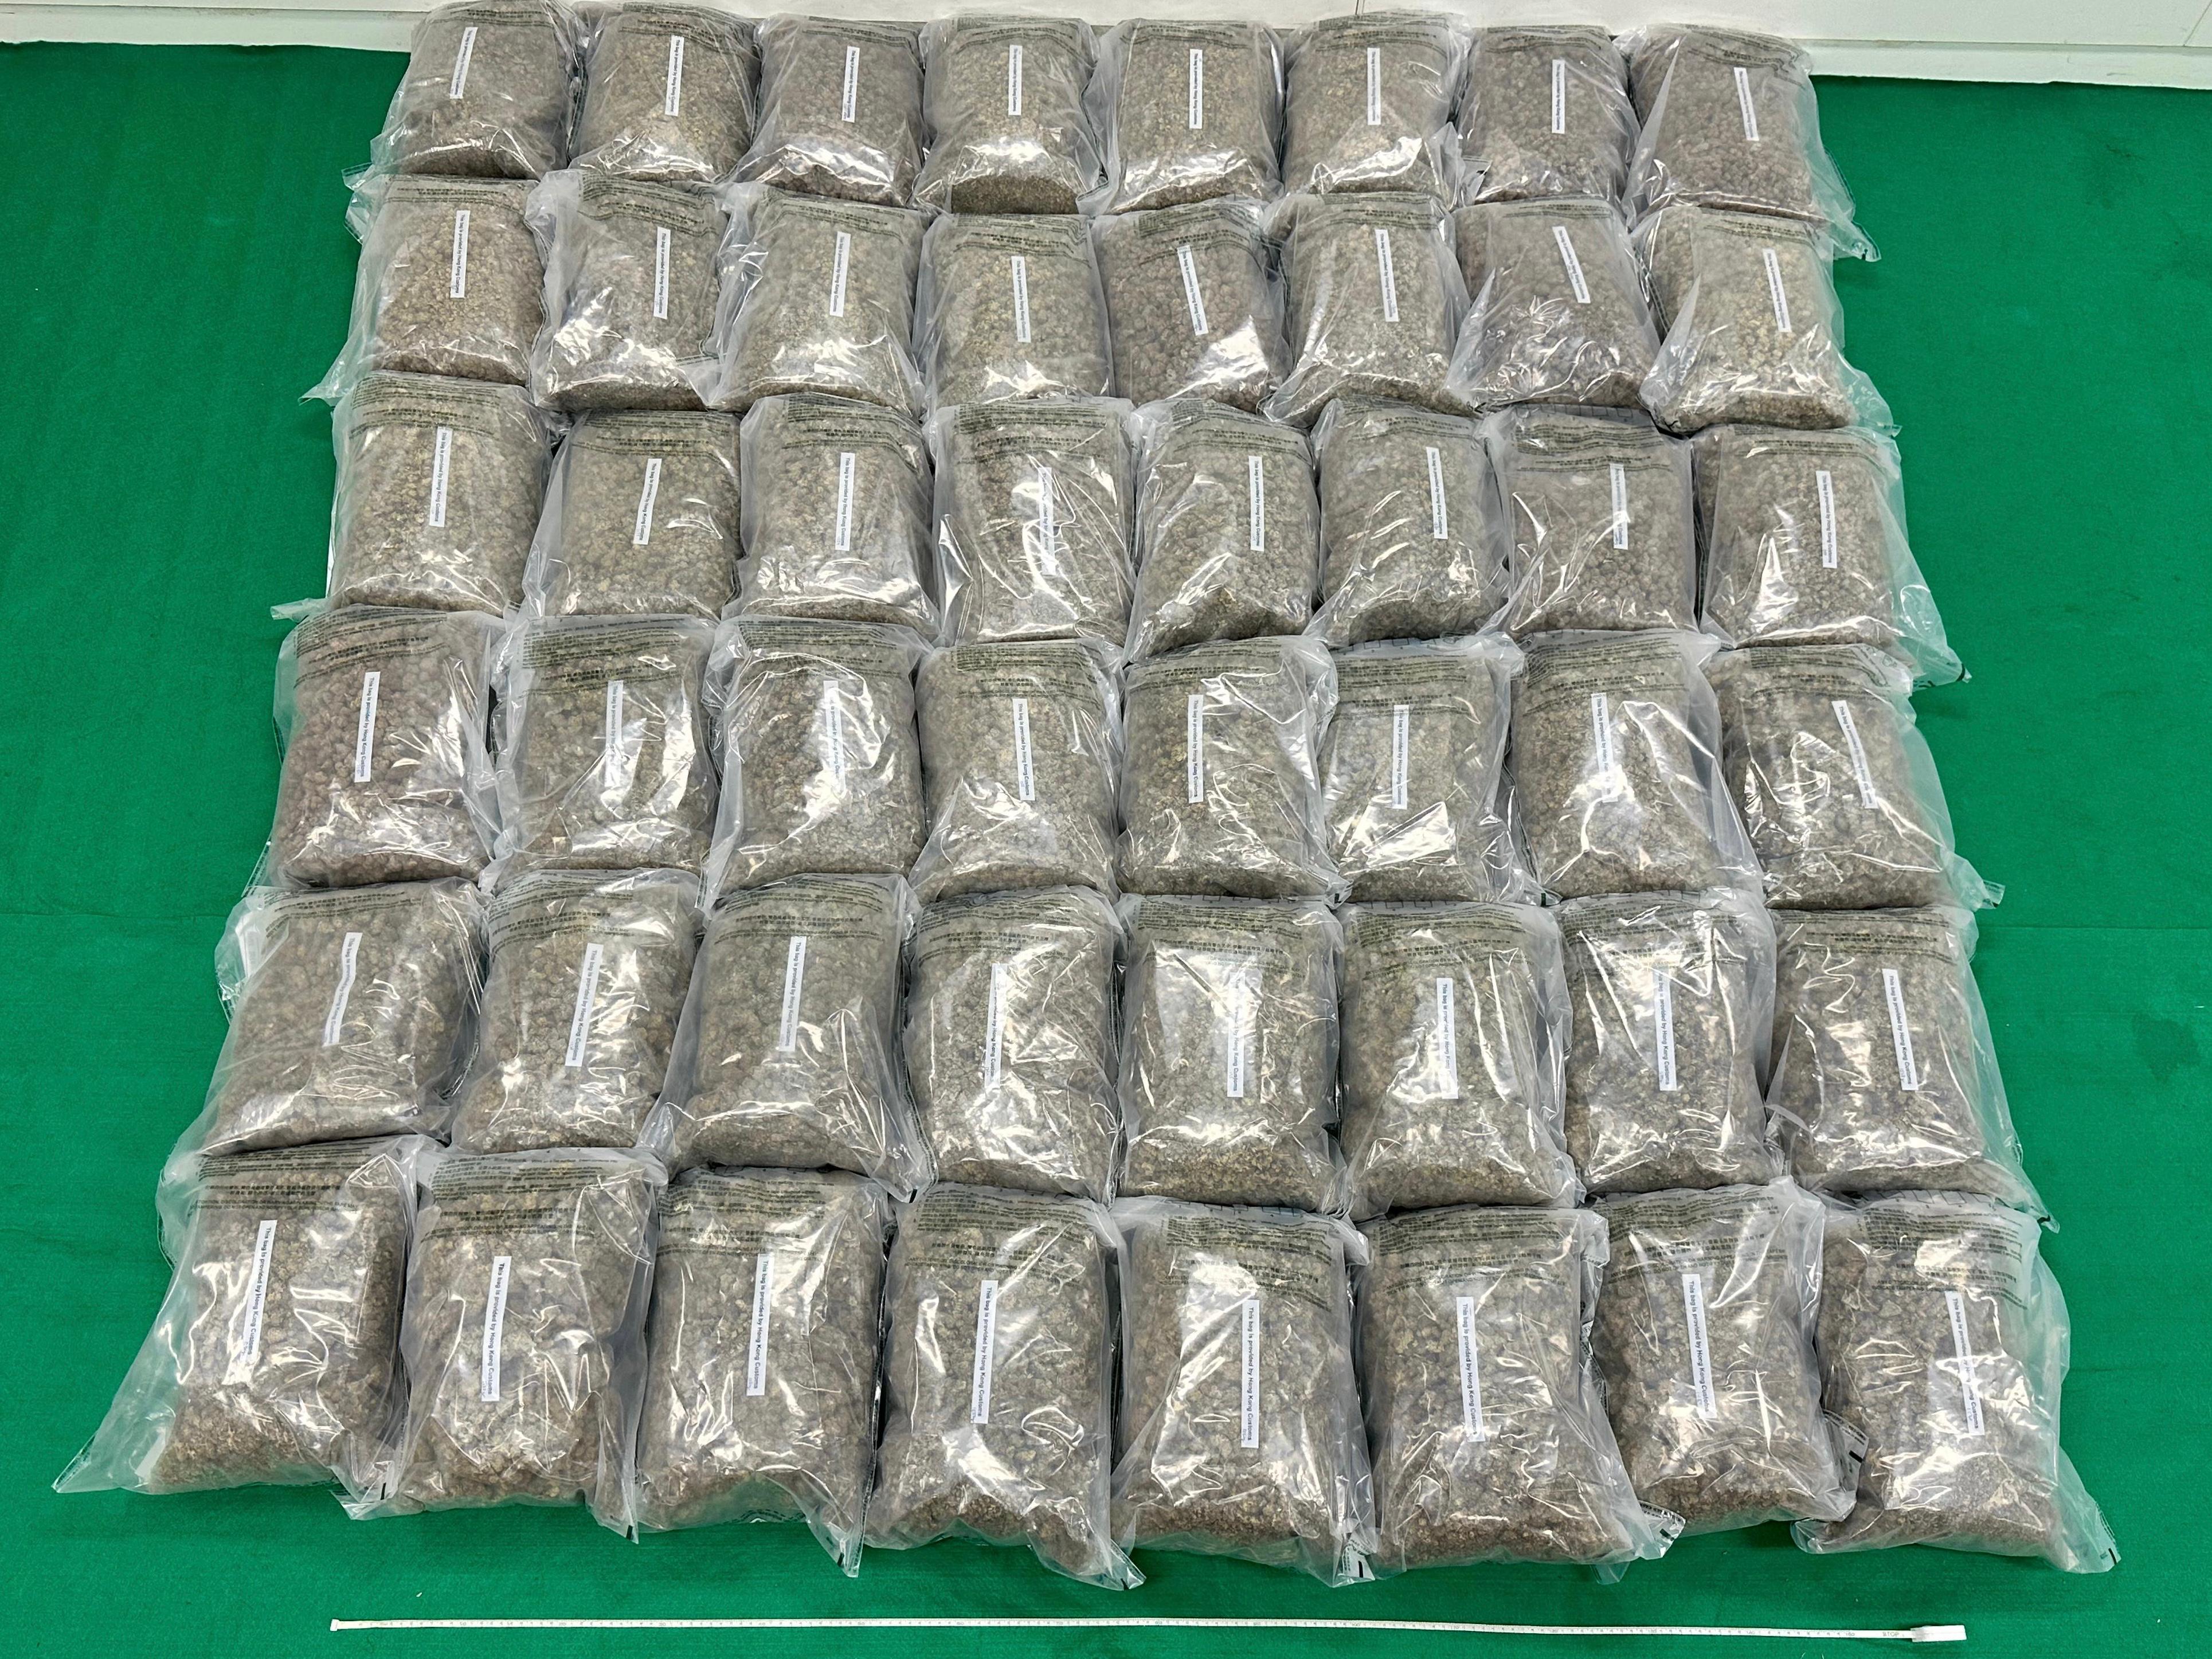 Hong Kong Customs on May 9 seized about 77 kilograms of suspected cannabis buds, with an estimated market value of about $16 million, at the Kwai Chung Customhouse Cargo Examination Compound. Photo shows the suspected cannabis buds seized.